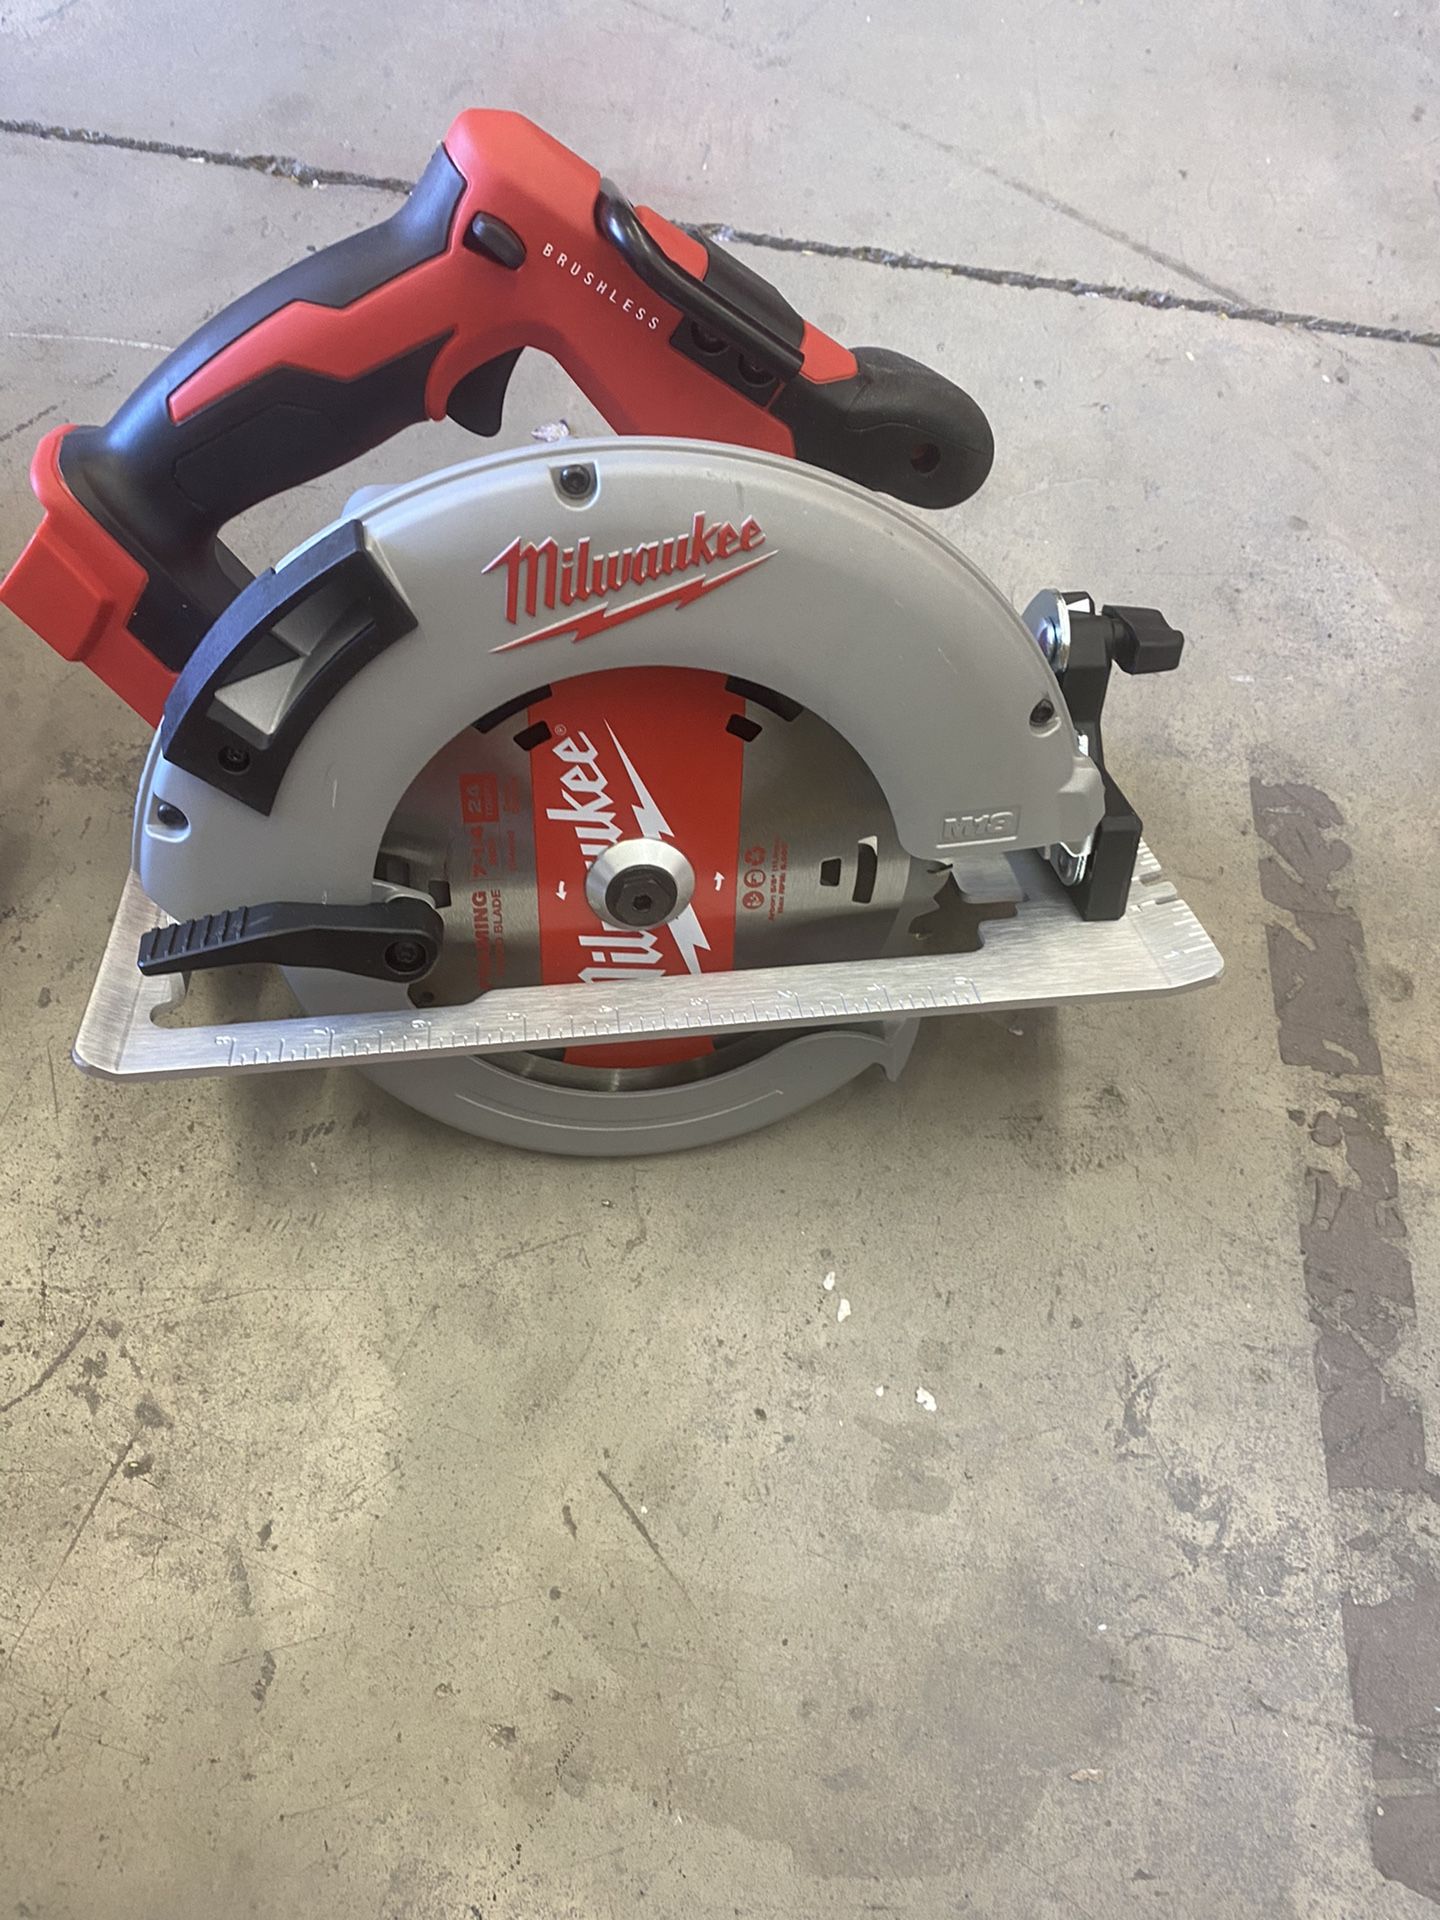 Milwaukee M18 18-Volt Lithium-Ion Brushless Cordless 7-1/4 in. Circular Saw (Tool-Only)